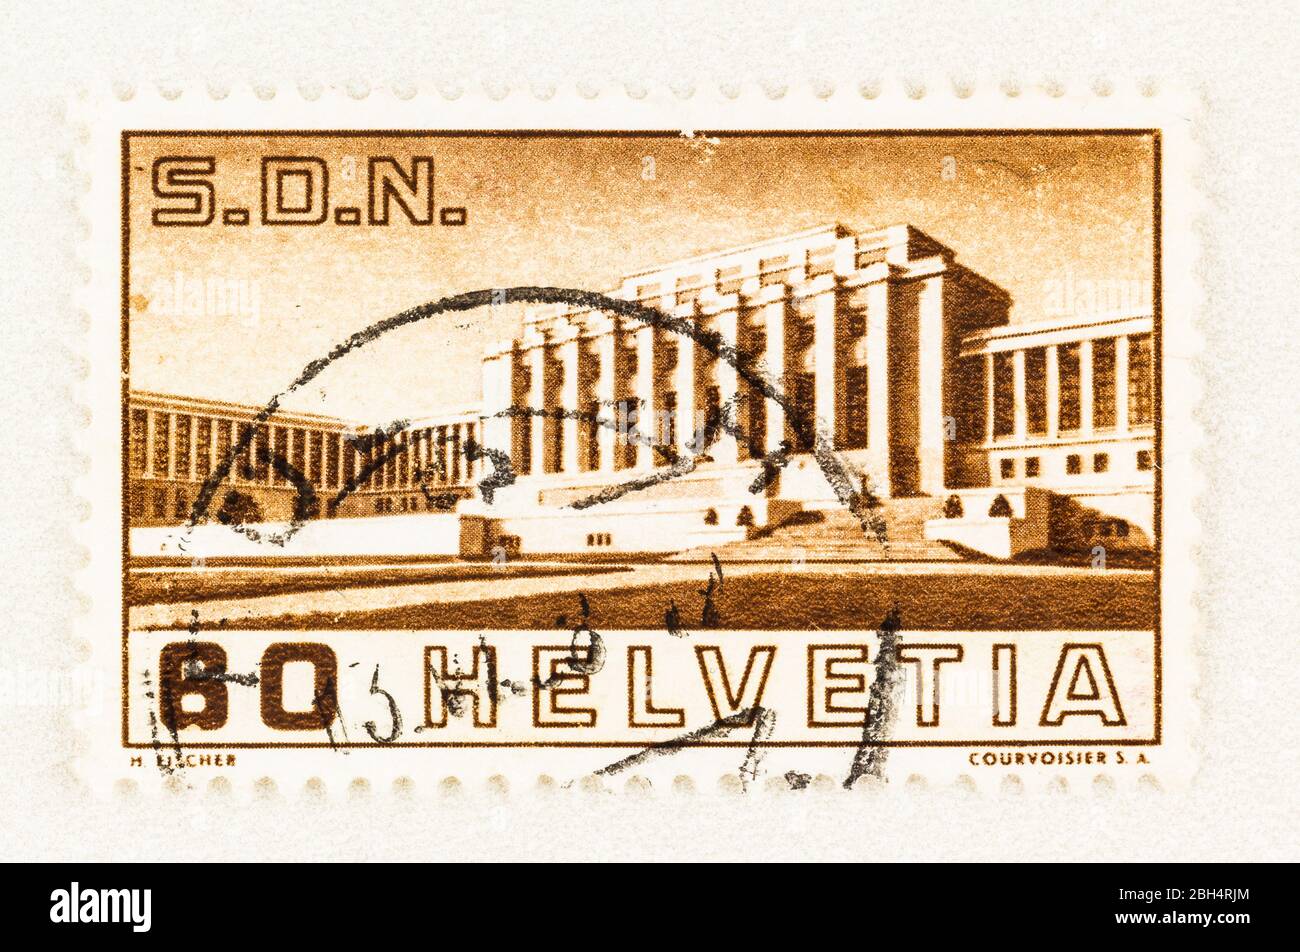 SEATTLE WASHINGTON - April 18, 2020: 1938 Swiss postage stamp with main building of the Palace of Nations, celebrating the opening of the Assembly Hal Stock Photo